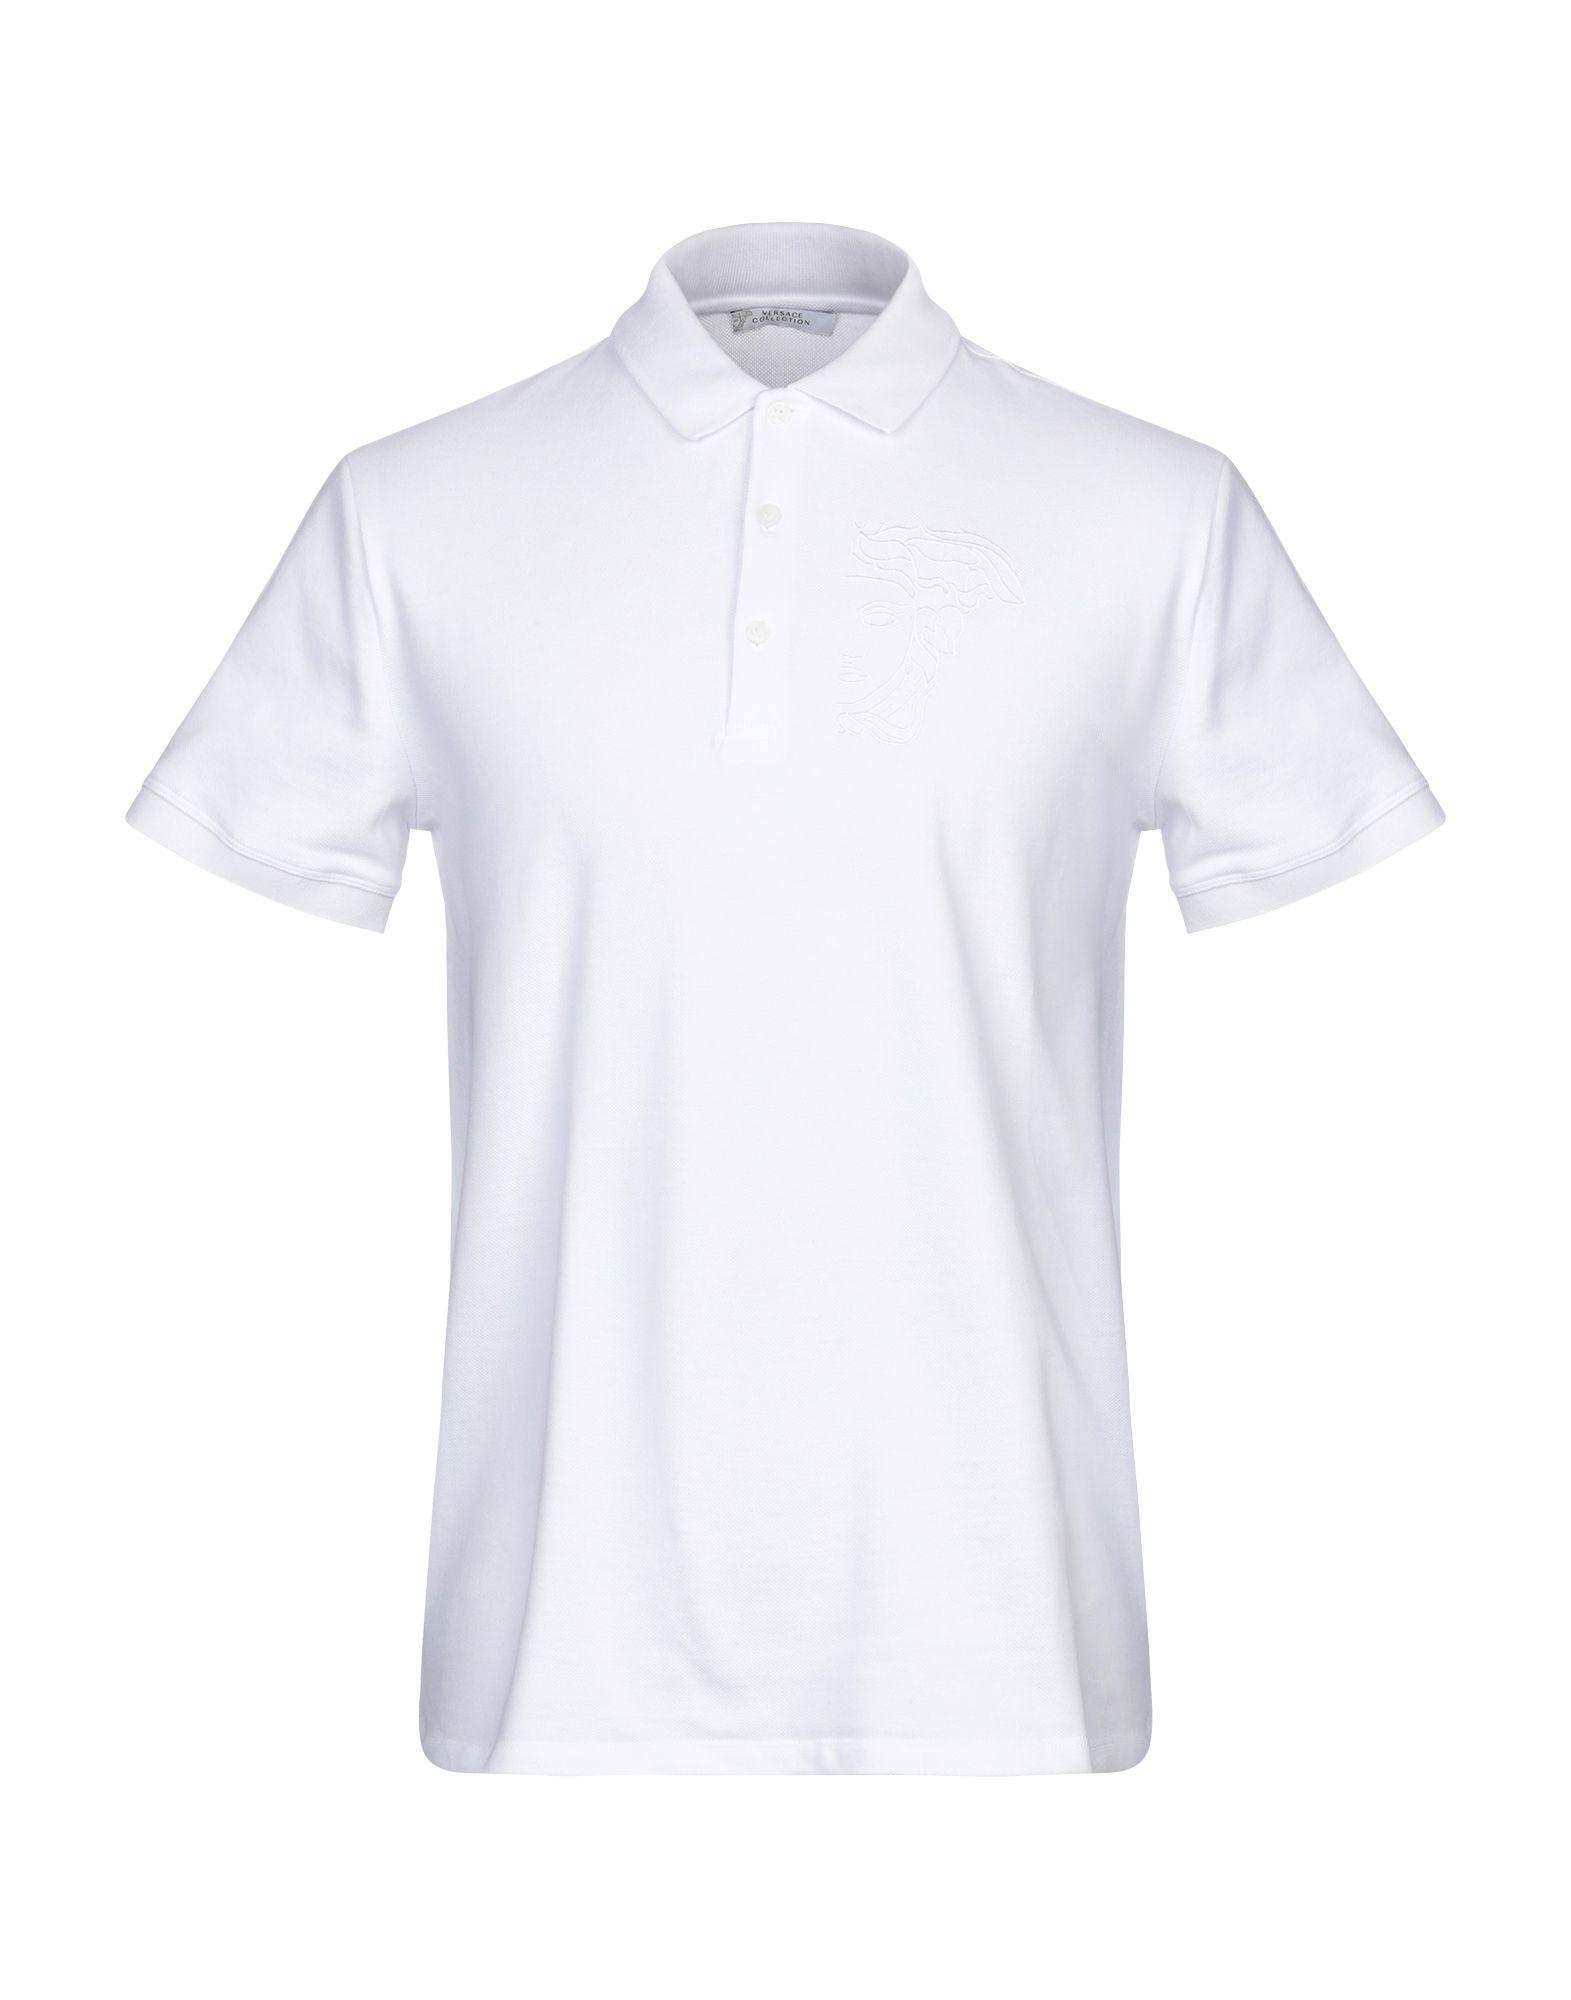 Versace Polo Shirt in White for Men - Lyst